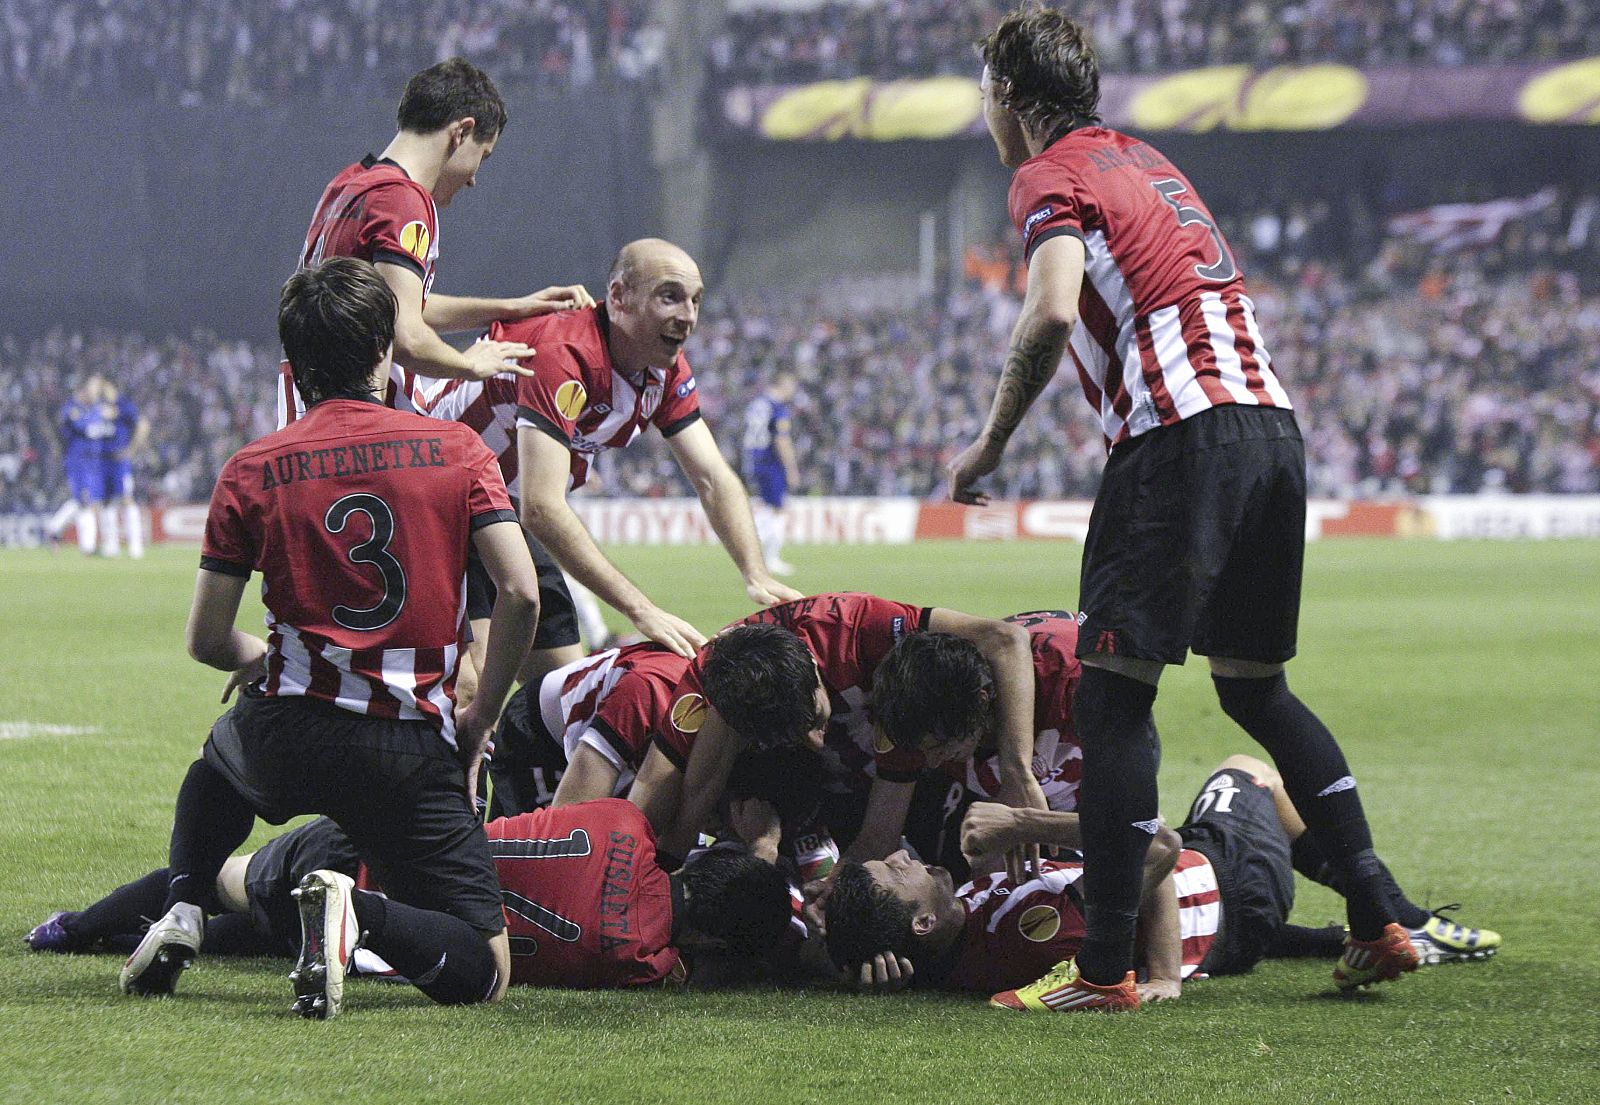 ATHLETIC-MANCHESTER UNITED